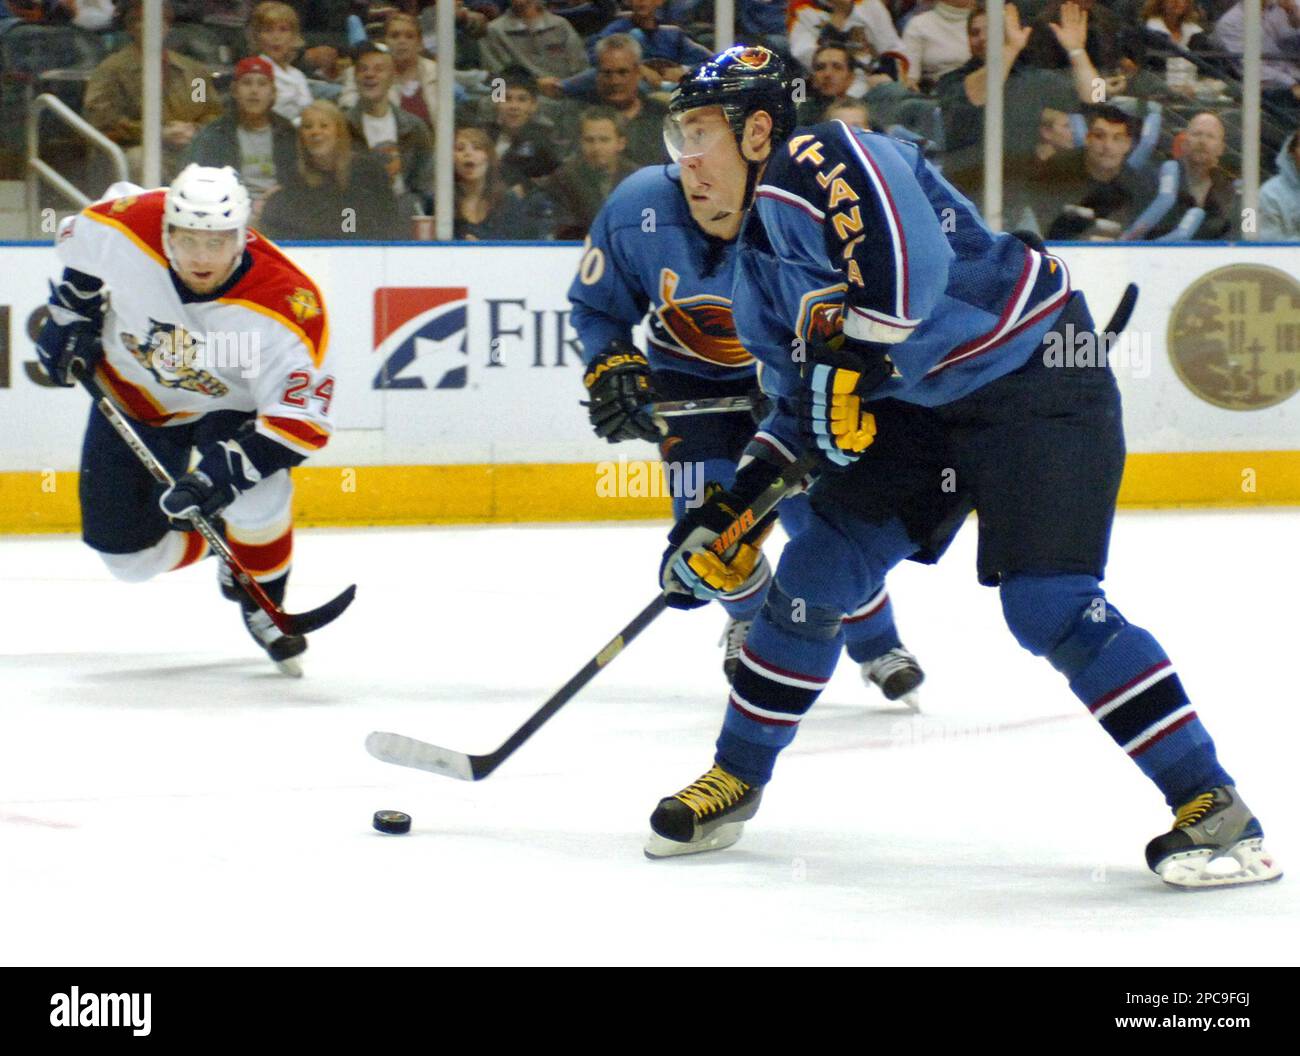 Atlanta Thrashers left wing Ilya Kovalchuk, center, of Russia, powers up  for a goal as Florida Panthers defenseman Ruslan Salei (24), of Belarus,  skates in to defend during the first period of